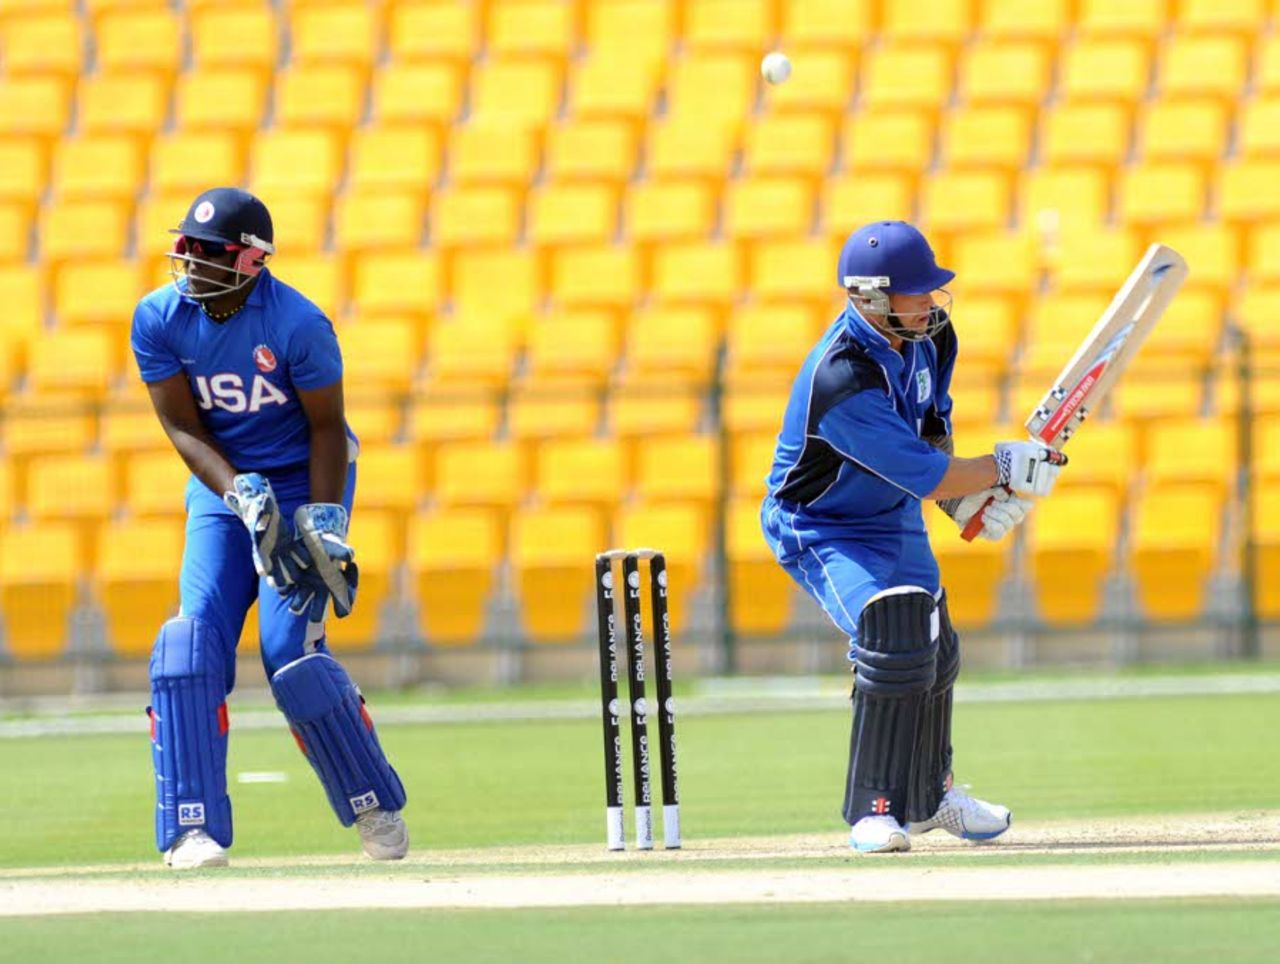 Gareth Berg, playing for Italy, in action against USA, Italy v USA, ICC World Twenty20 Qualifiers, Dubai, March 14, 2012